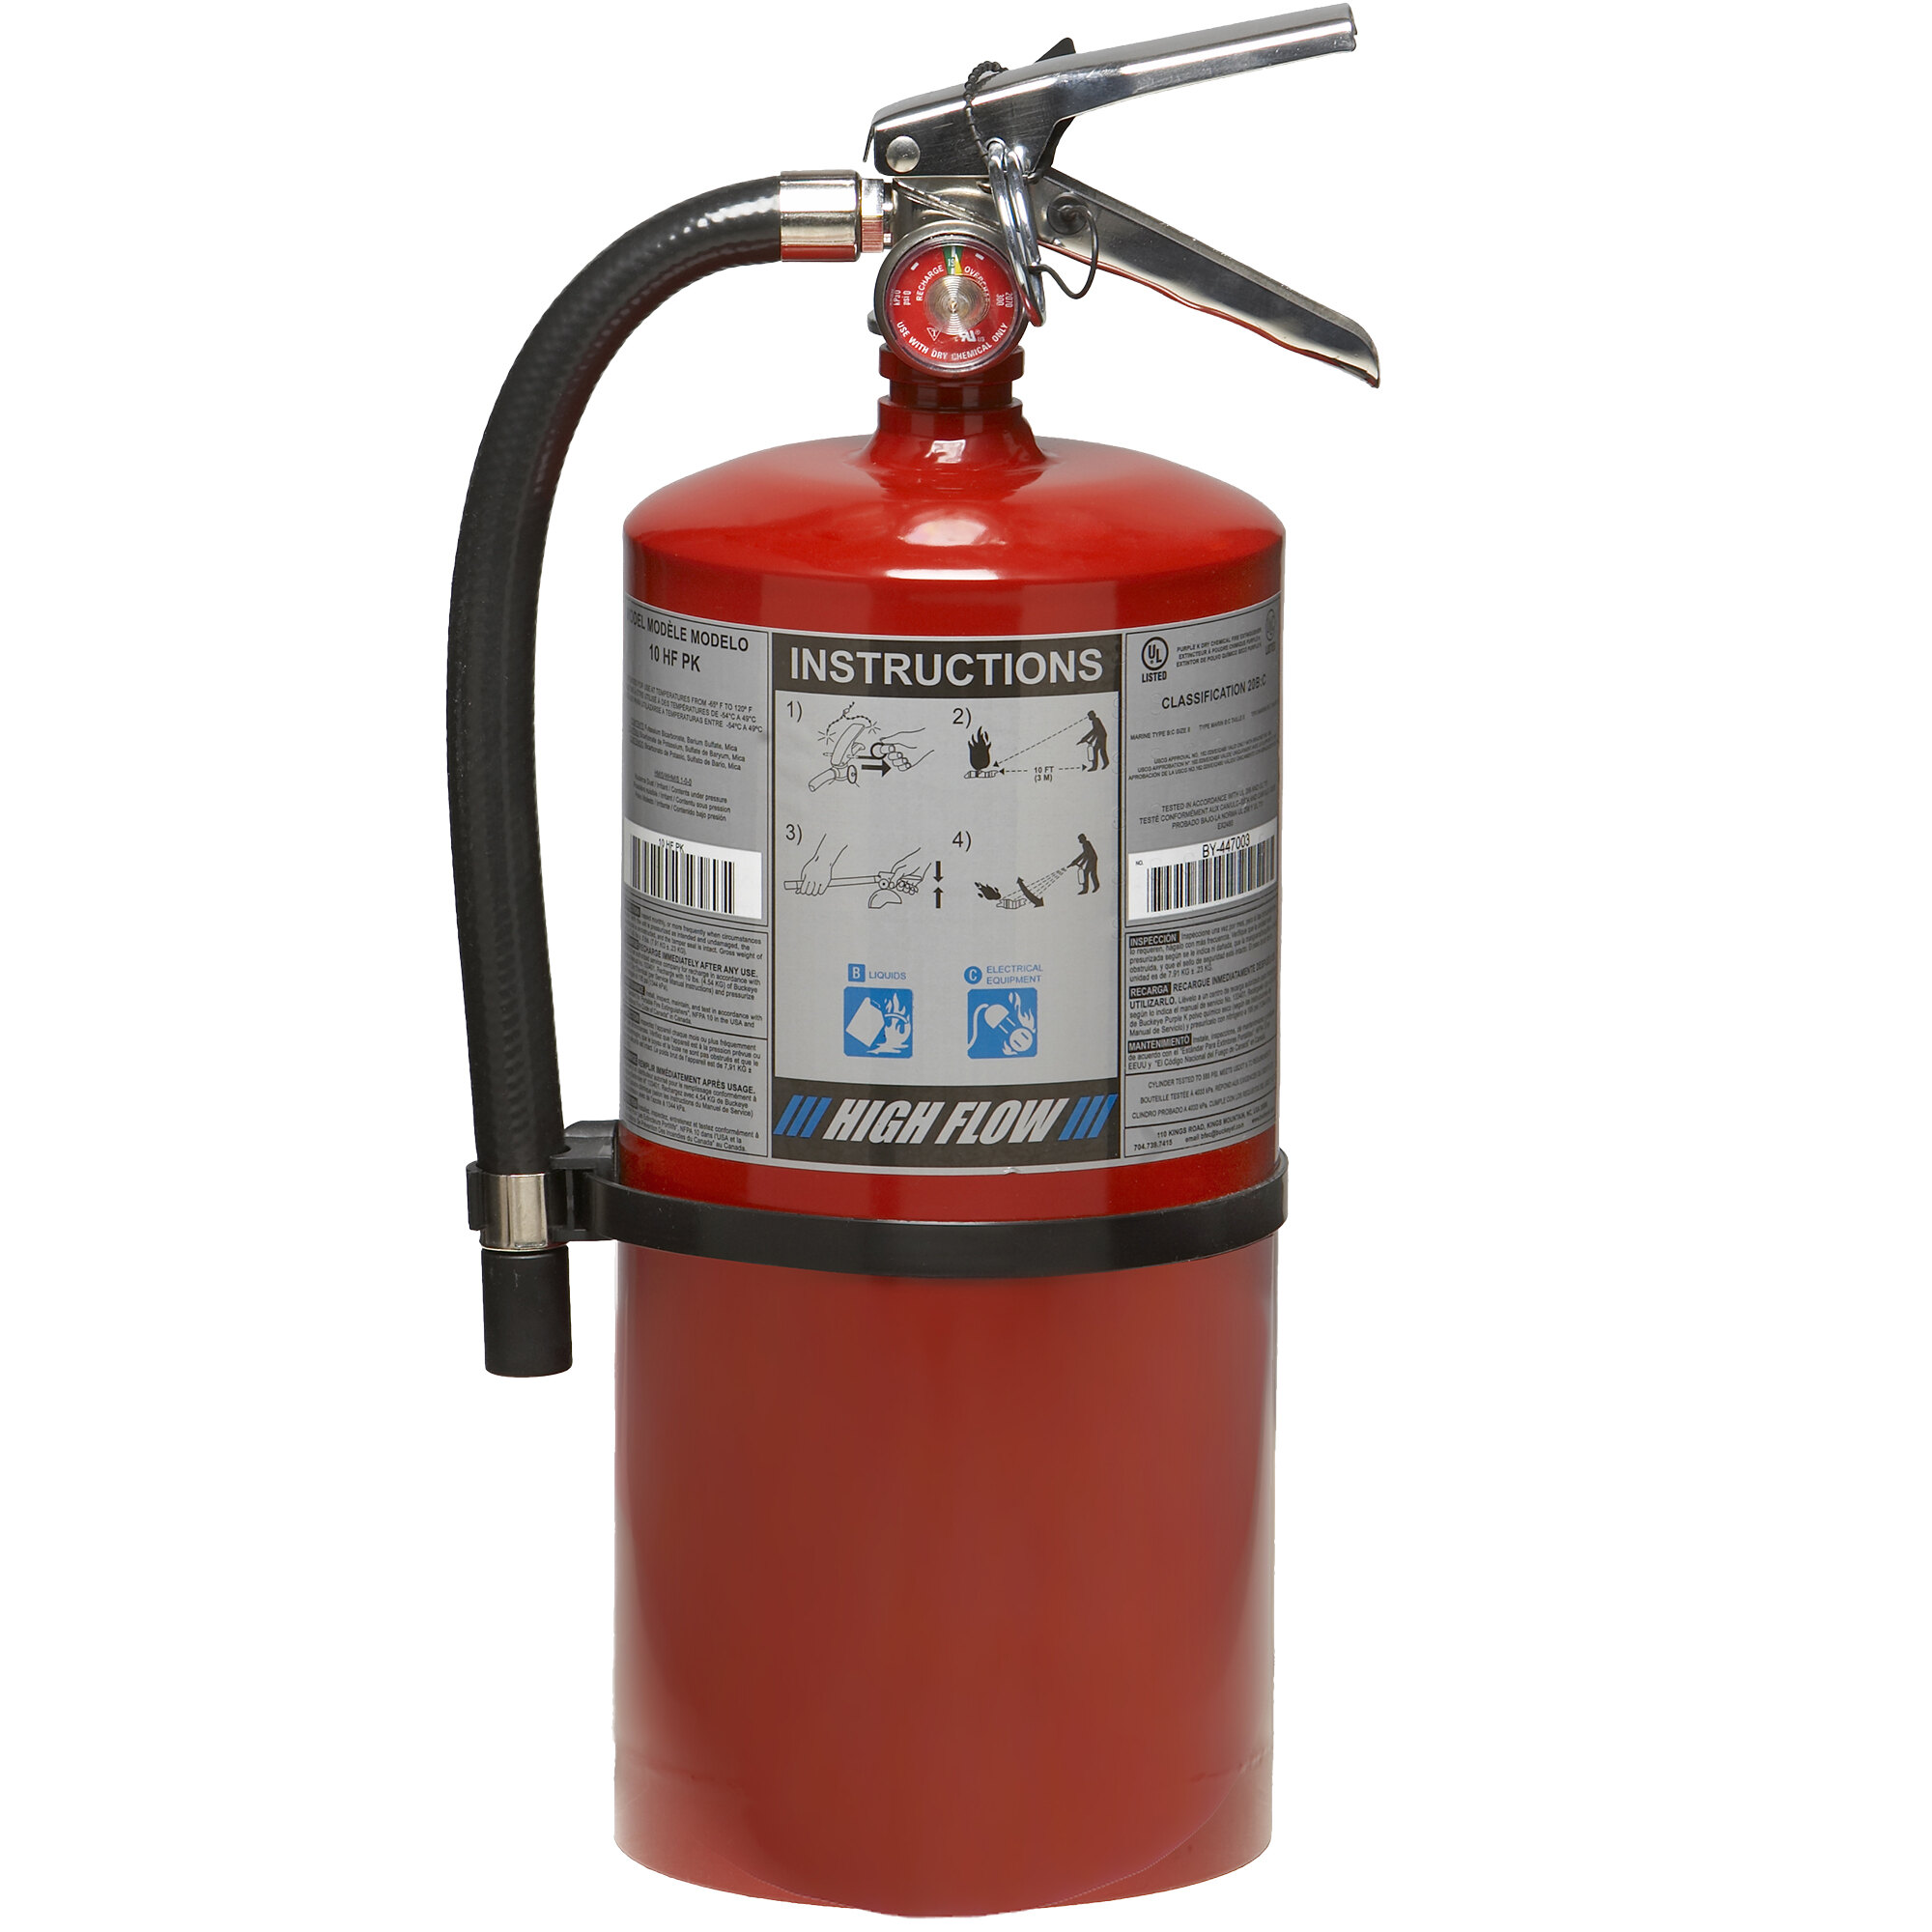 How long will a 10 lb fire extinguisher last?